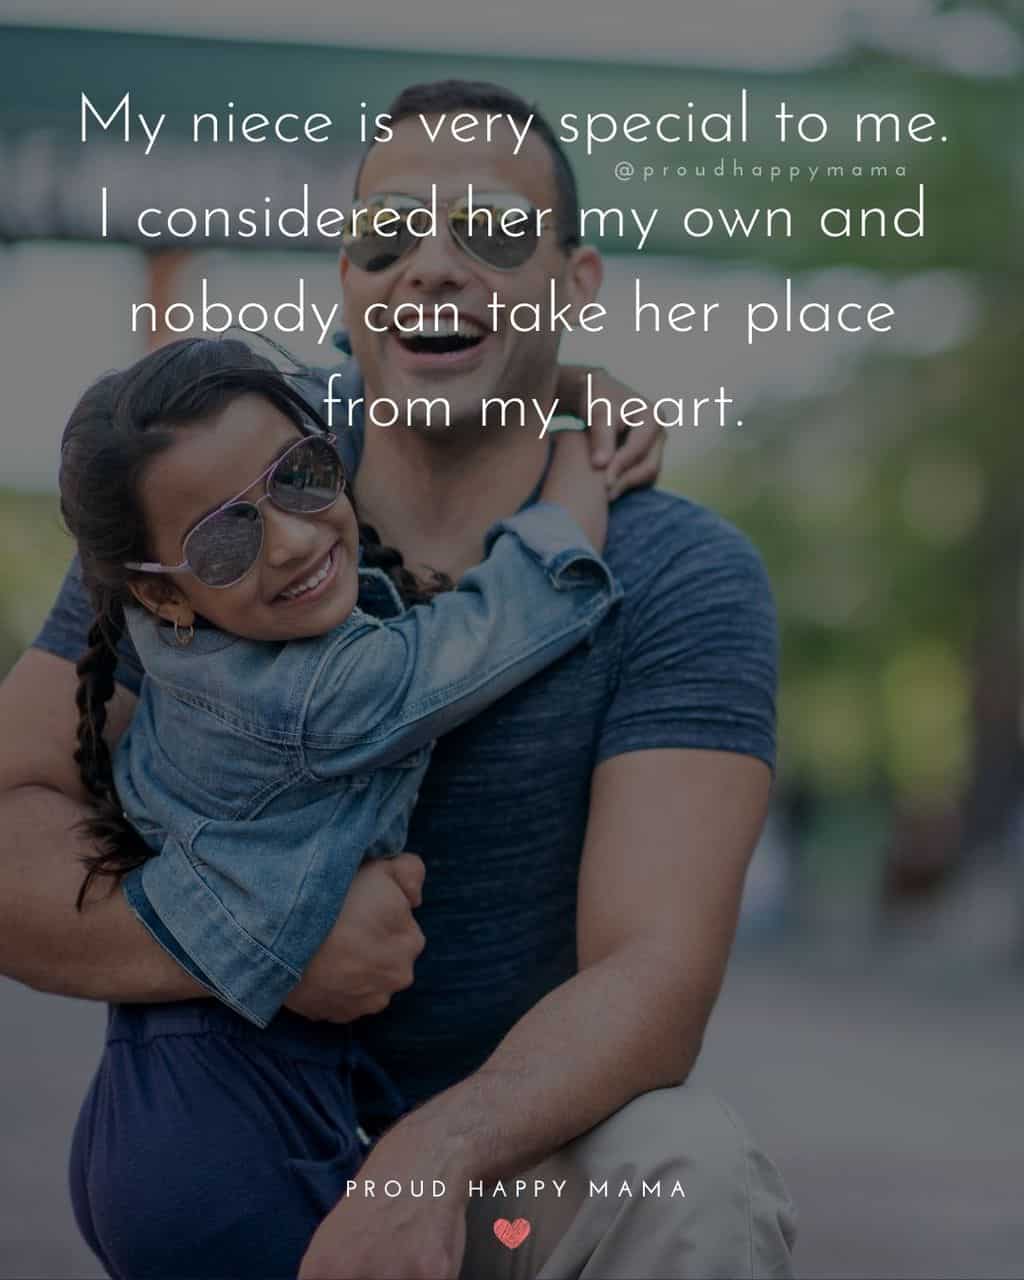 Niece Quotes - My niece is very special to me. I considered her my own and nobody can take her place from my heart.